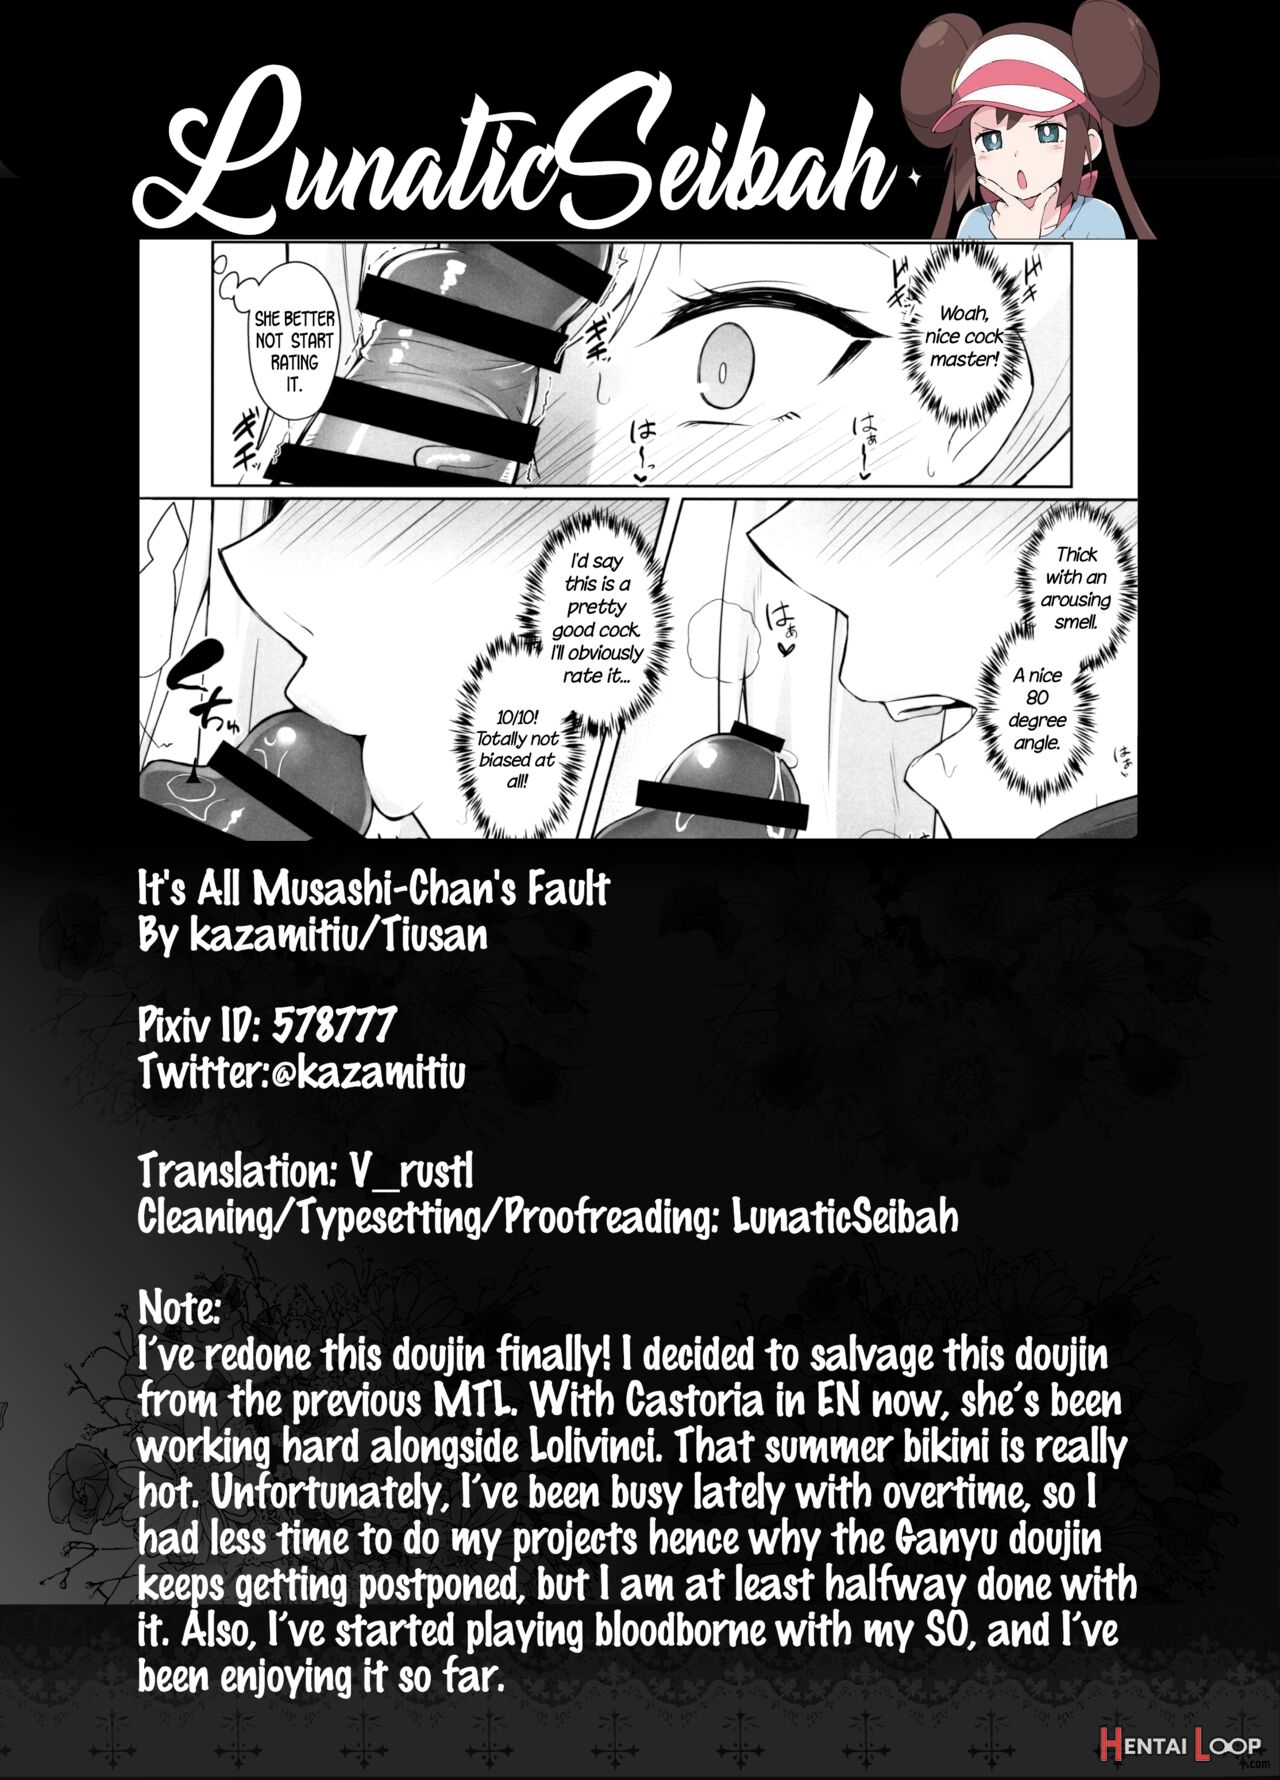 It's All Musashi-chan's Fault page 22